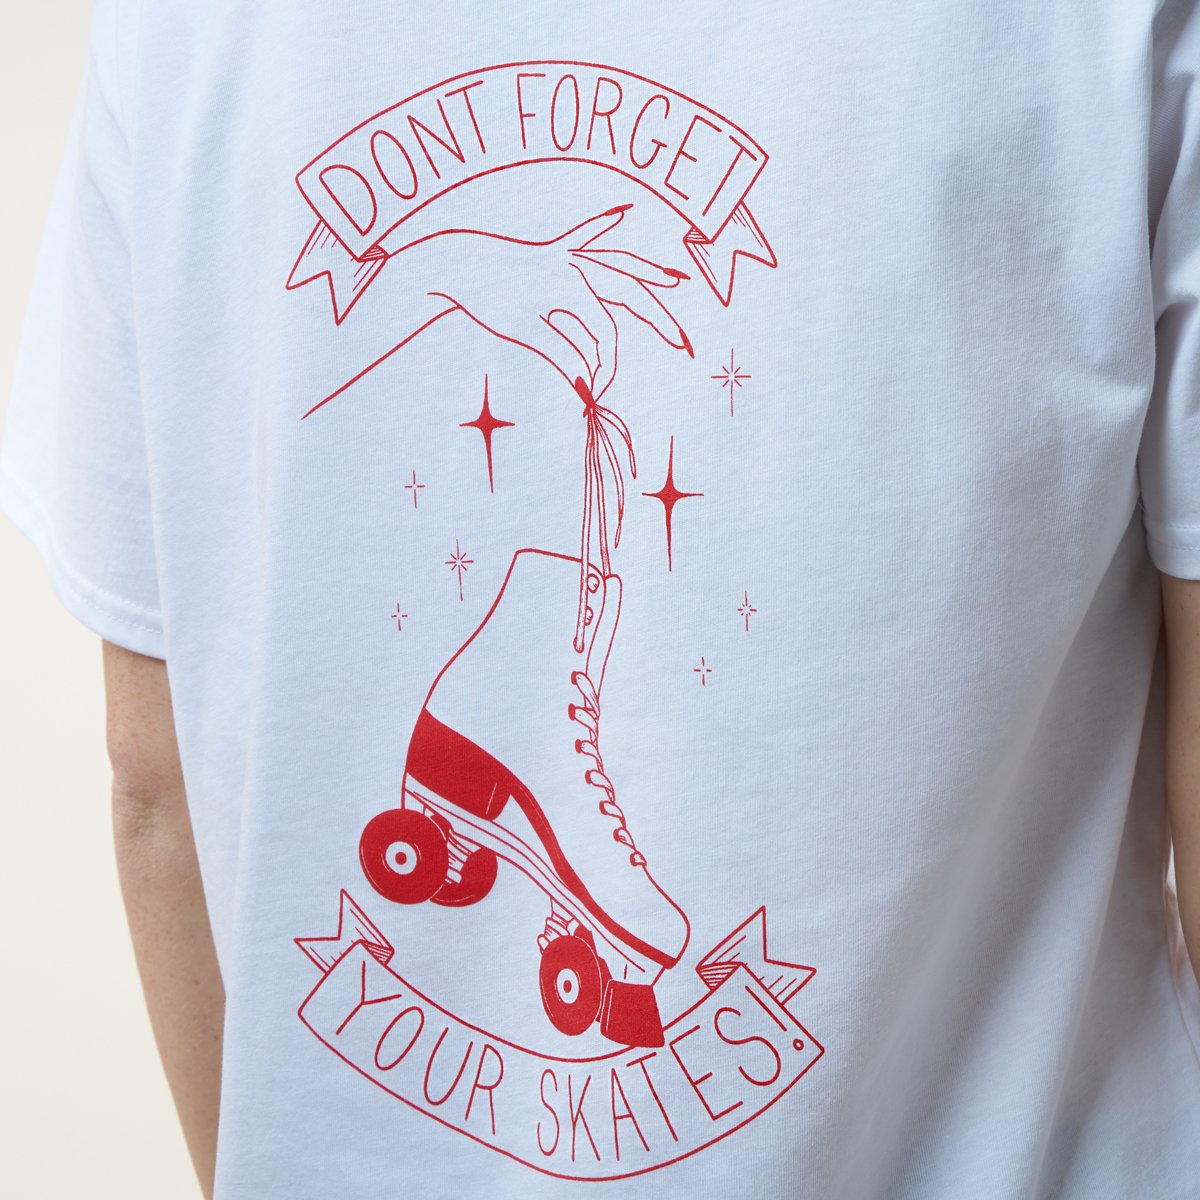 Paradise by Marawa 'Don't forget your skates' White T Shirt